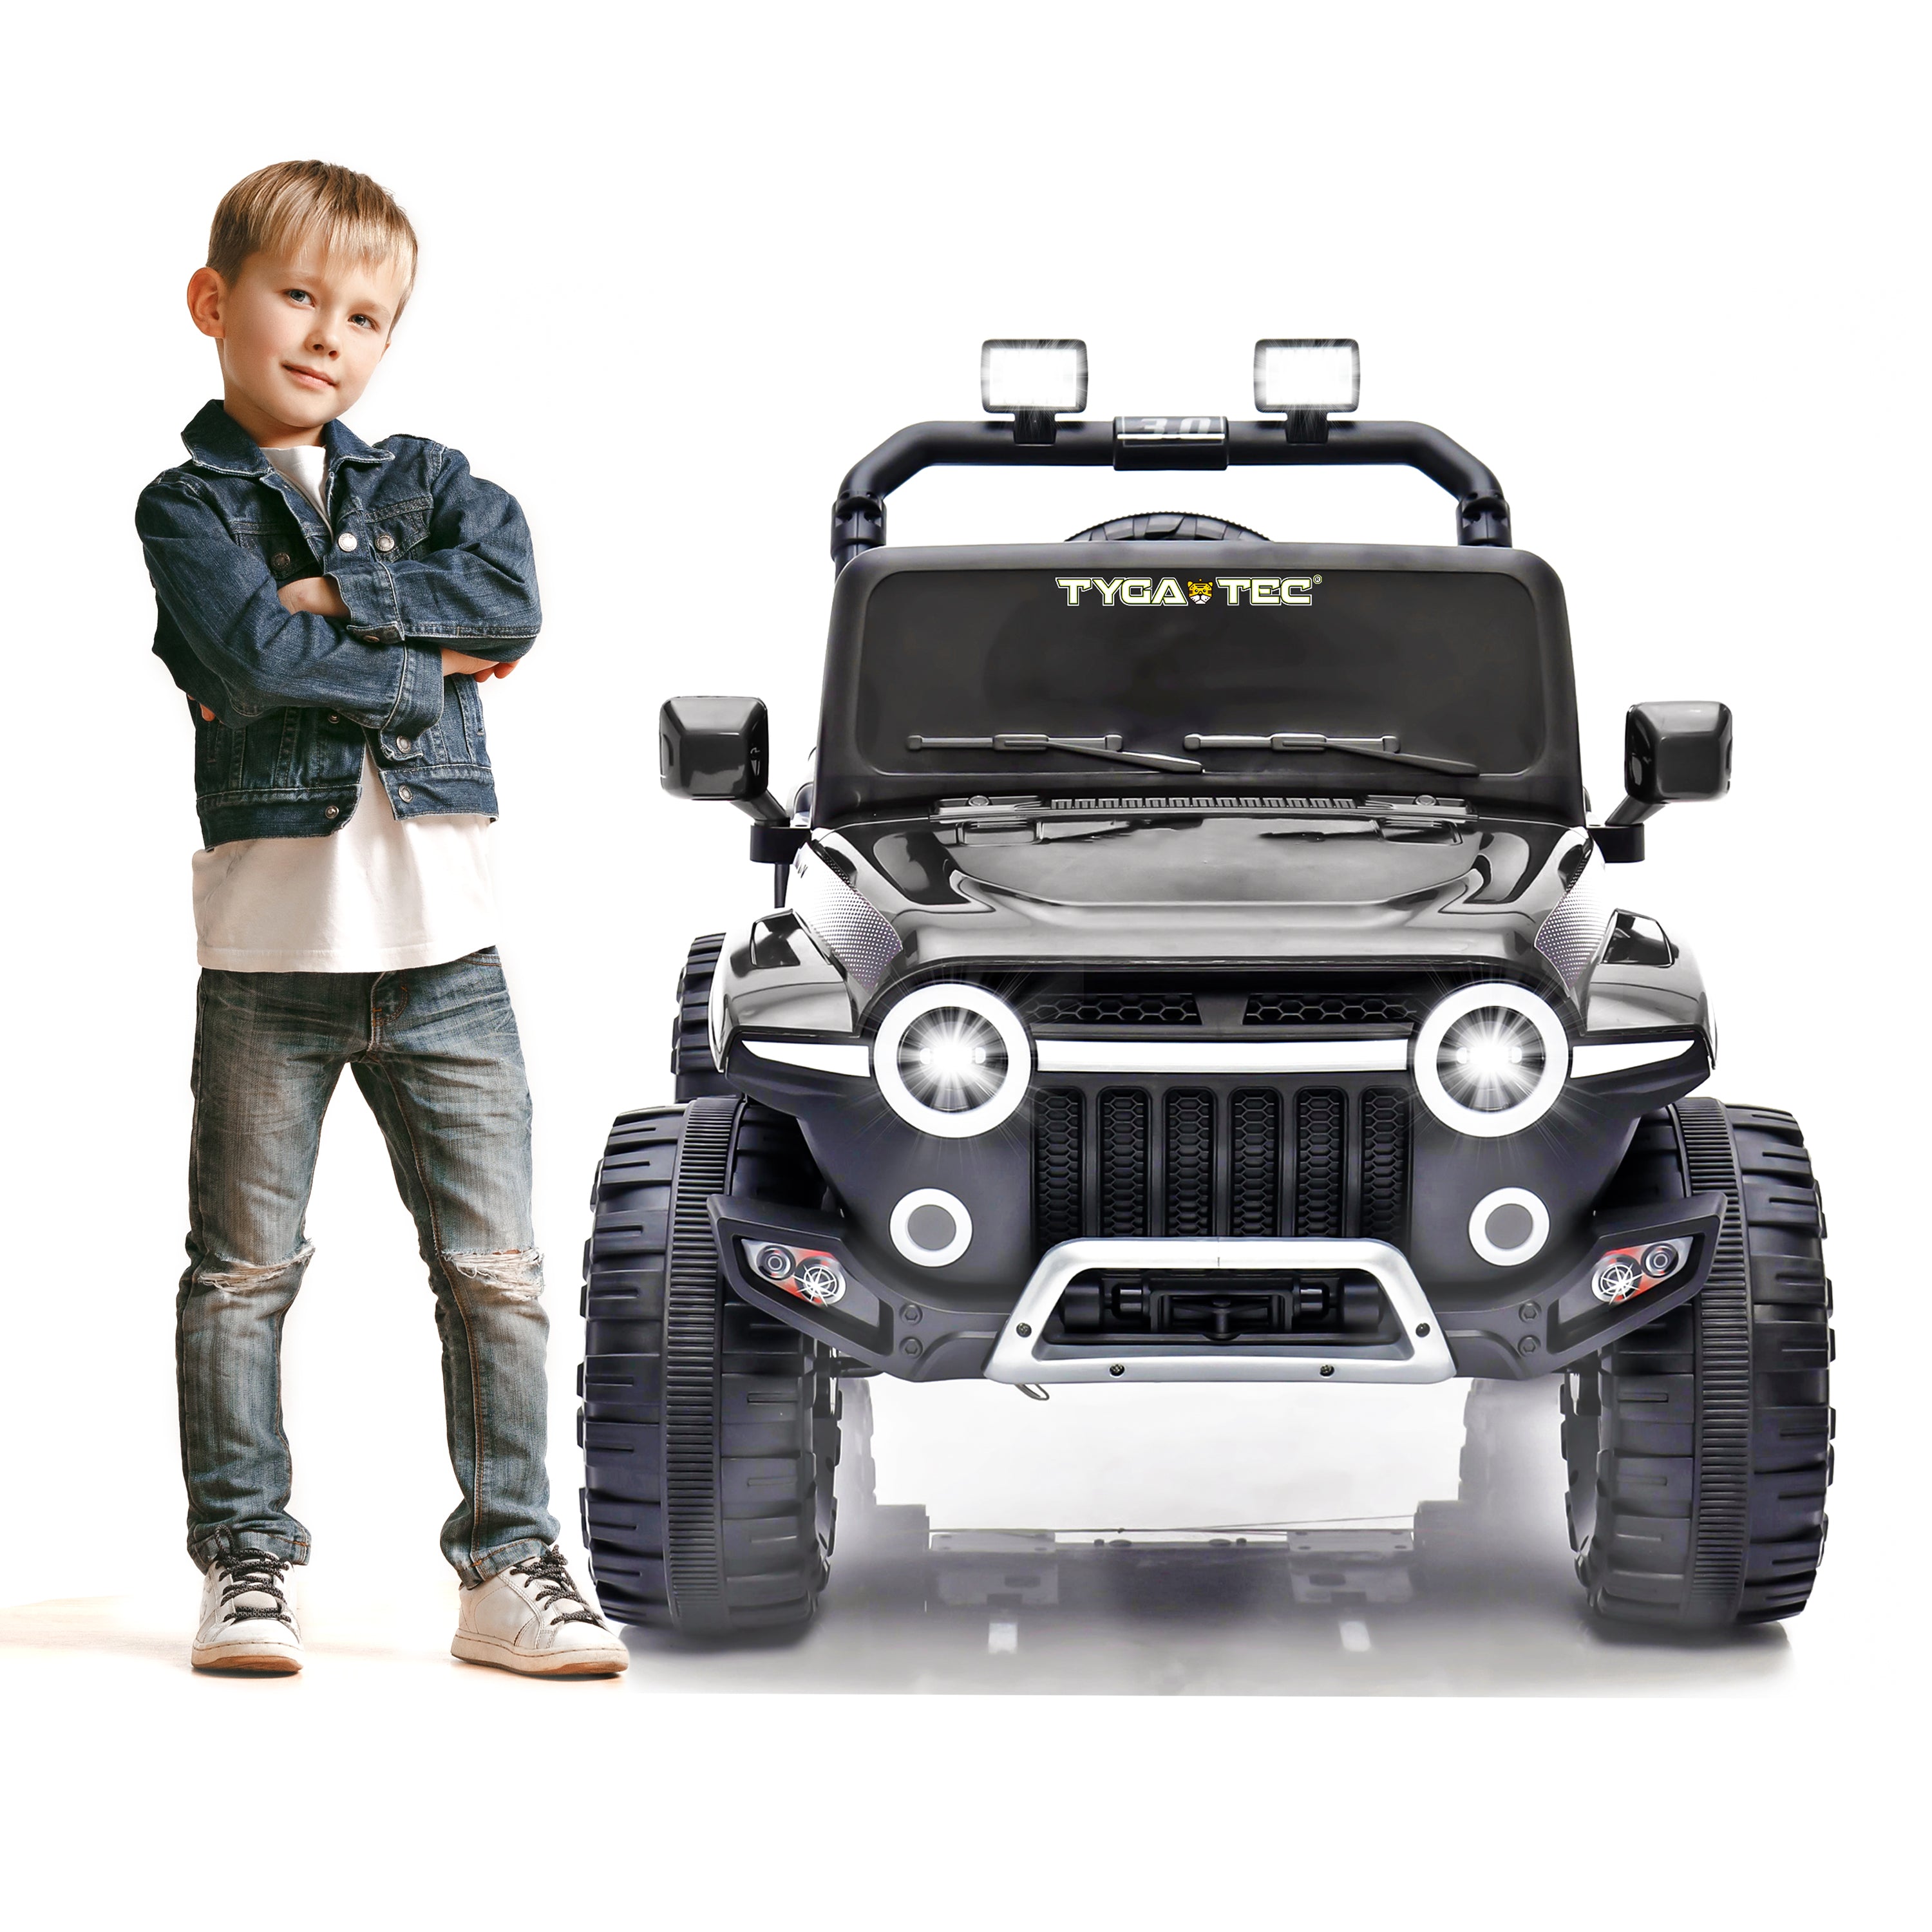 Tygatec Ride-on Kids Car Ground Force SCOUT (GREY COLOUR)